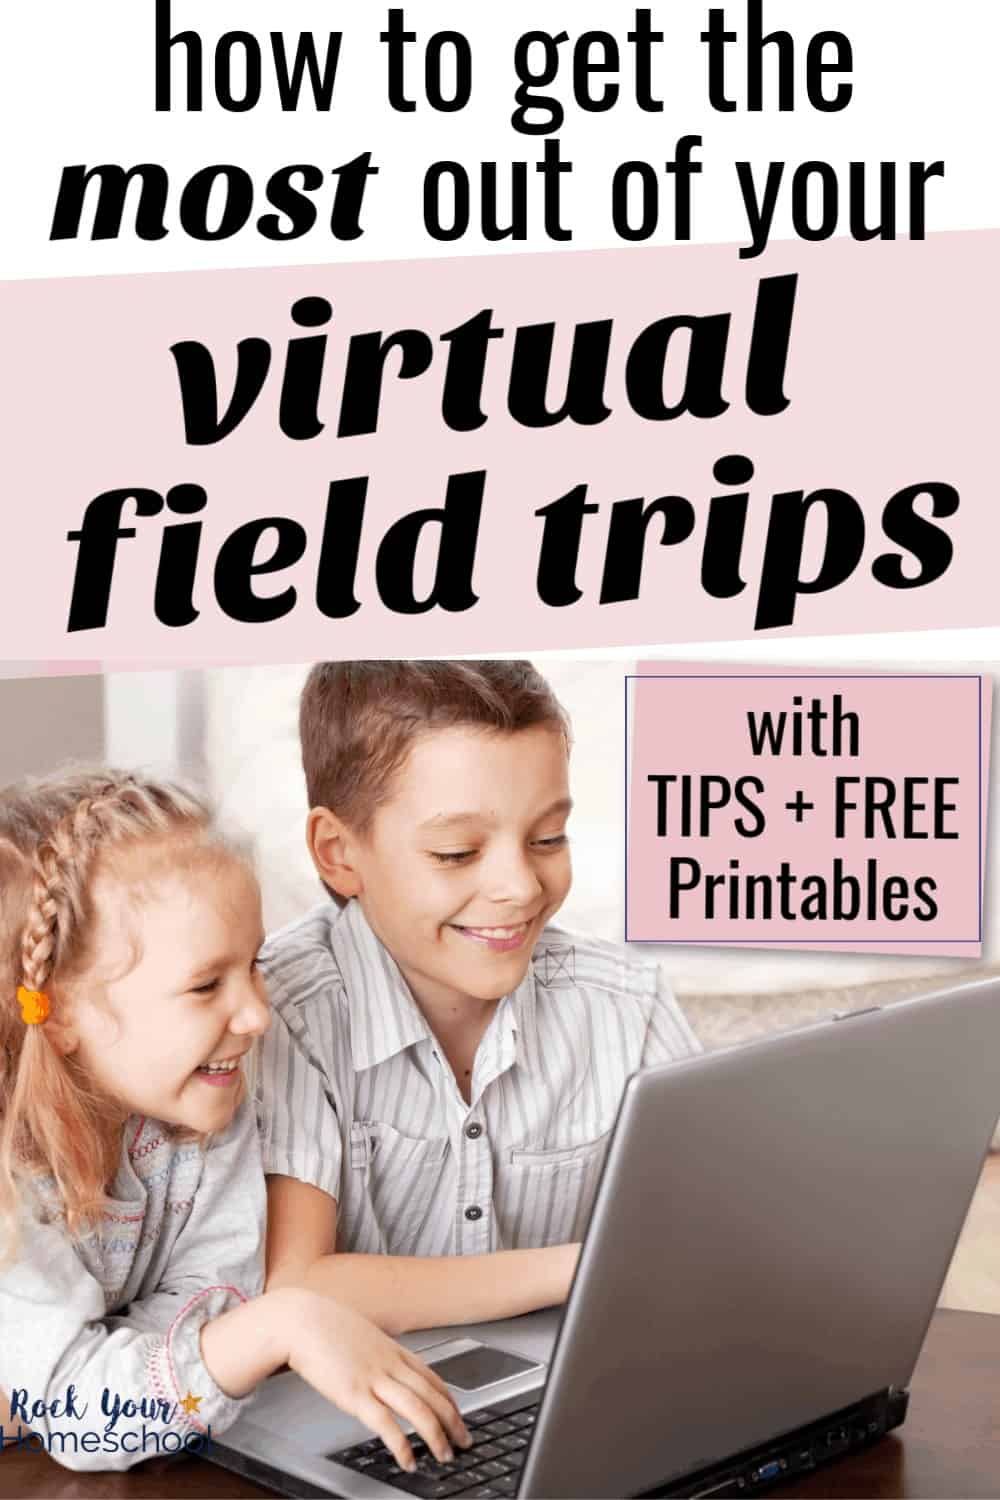 How to Get the Most Out of Your Virtual Field Trips